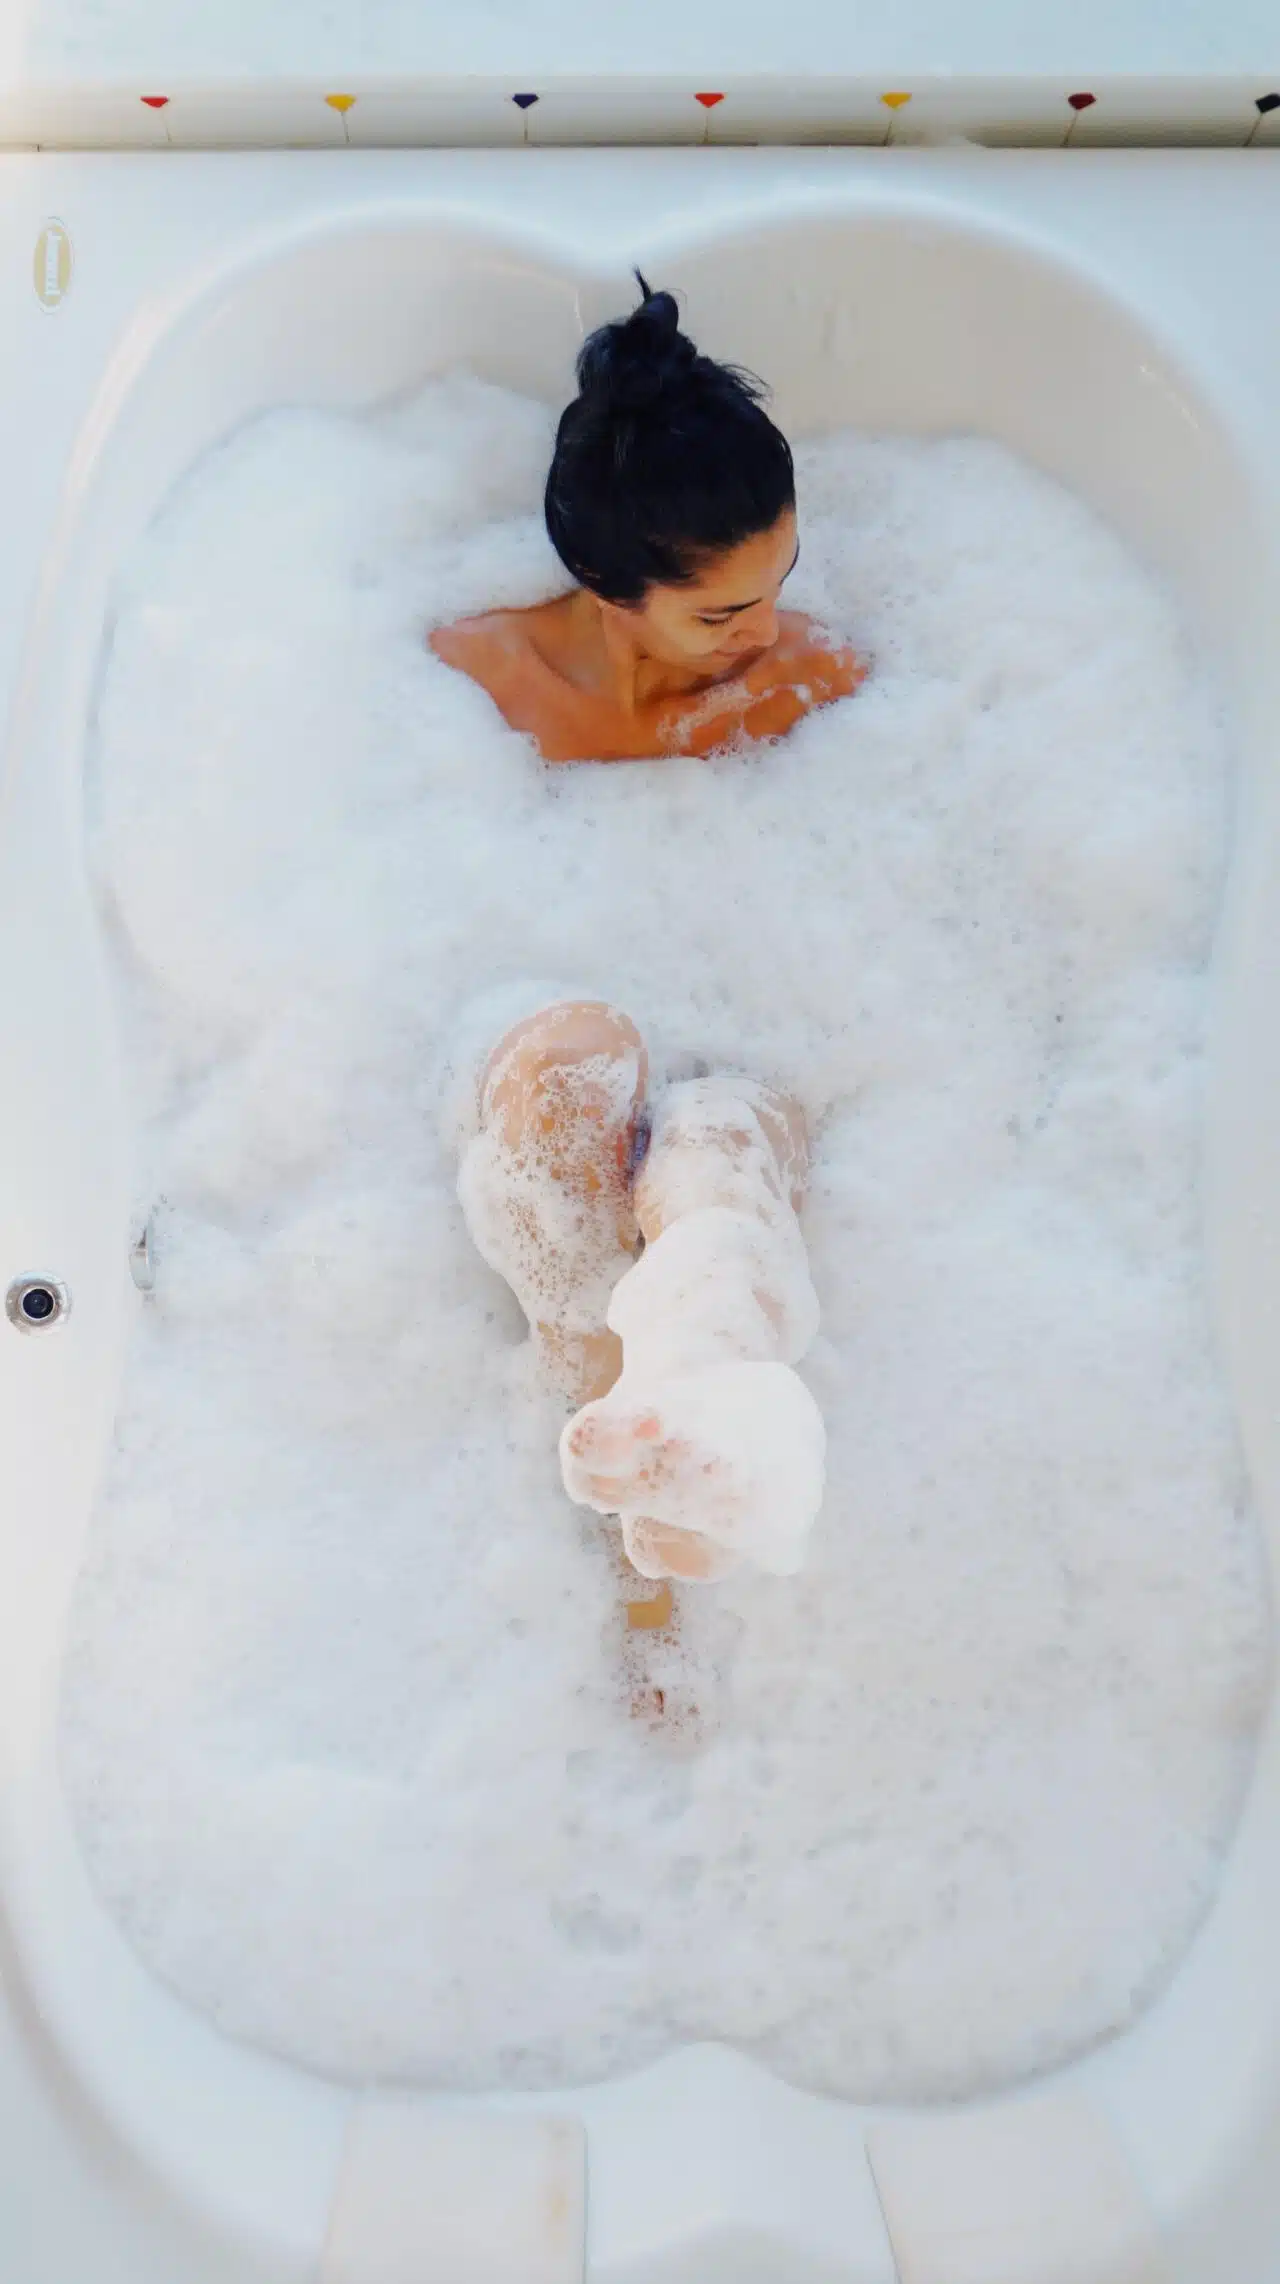 Discover The Health Benefits Of A Bubble Bath!